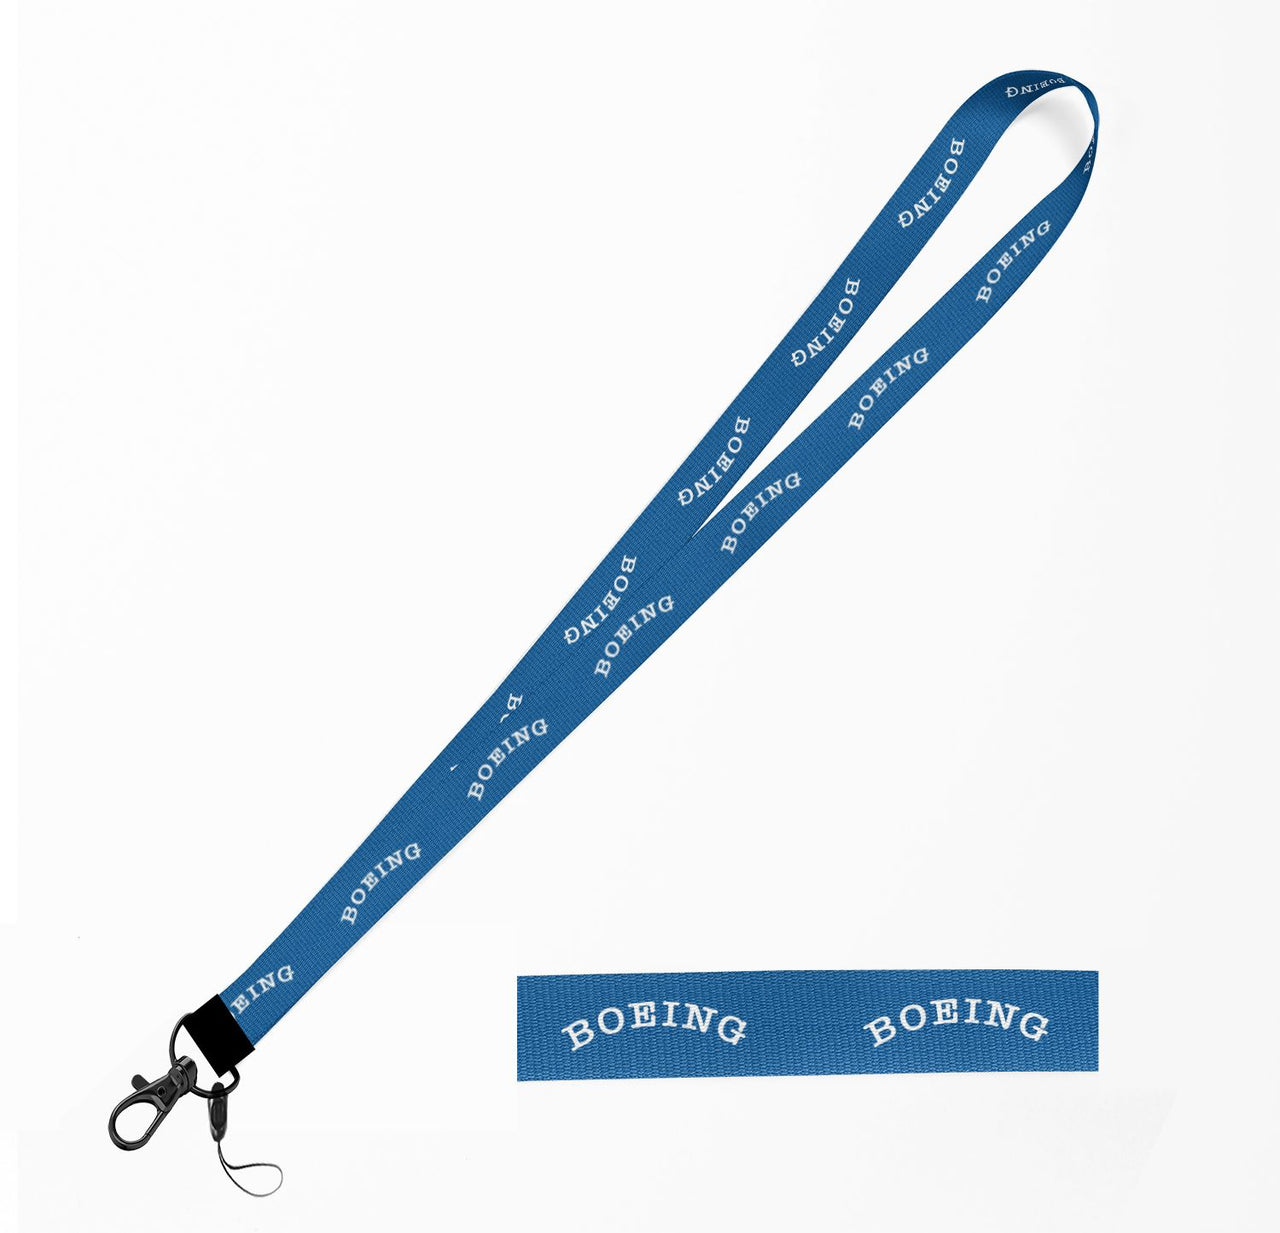 Special BOEING Text Designed Lanyard & ID Holders